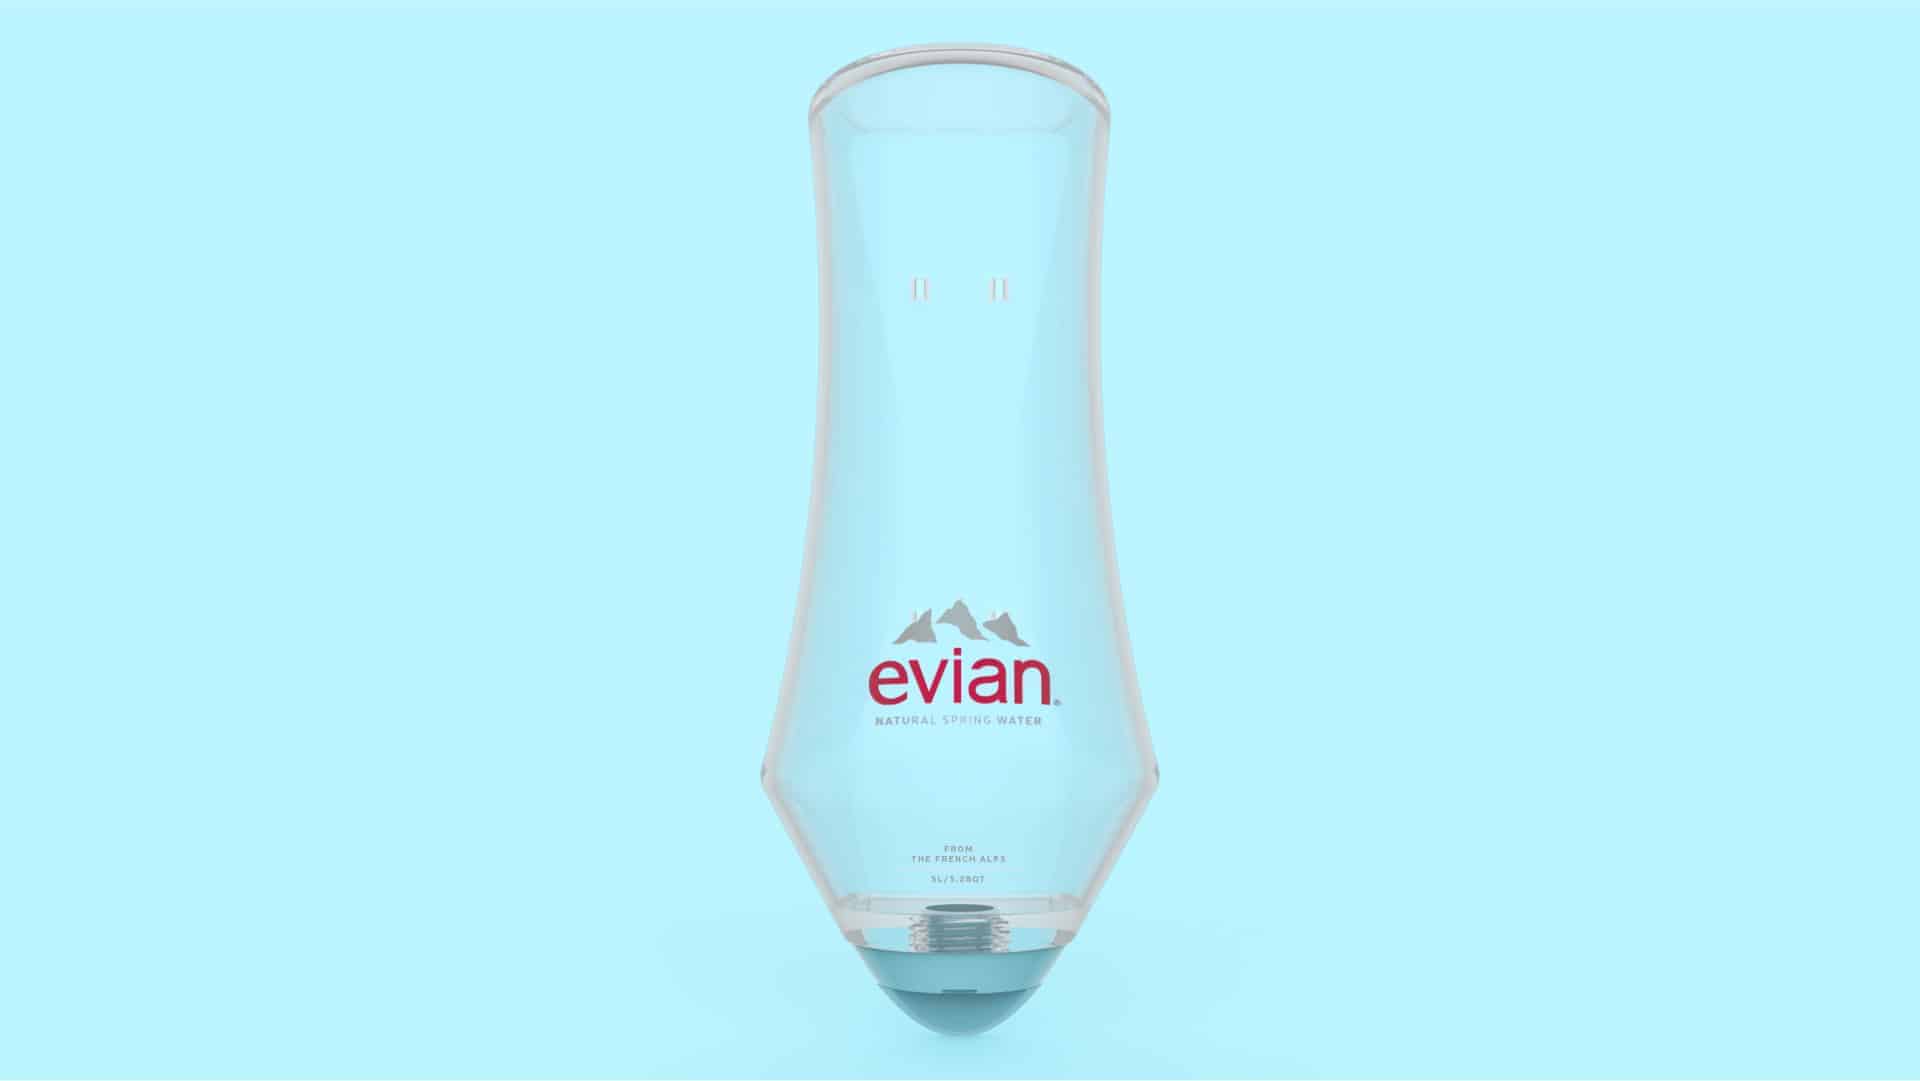 Evian for home